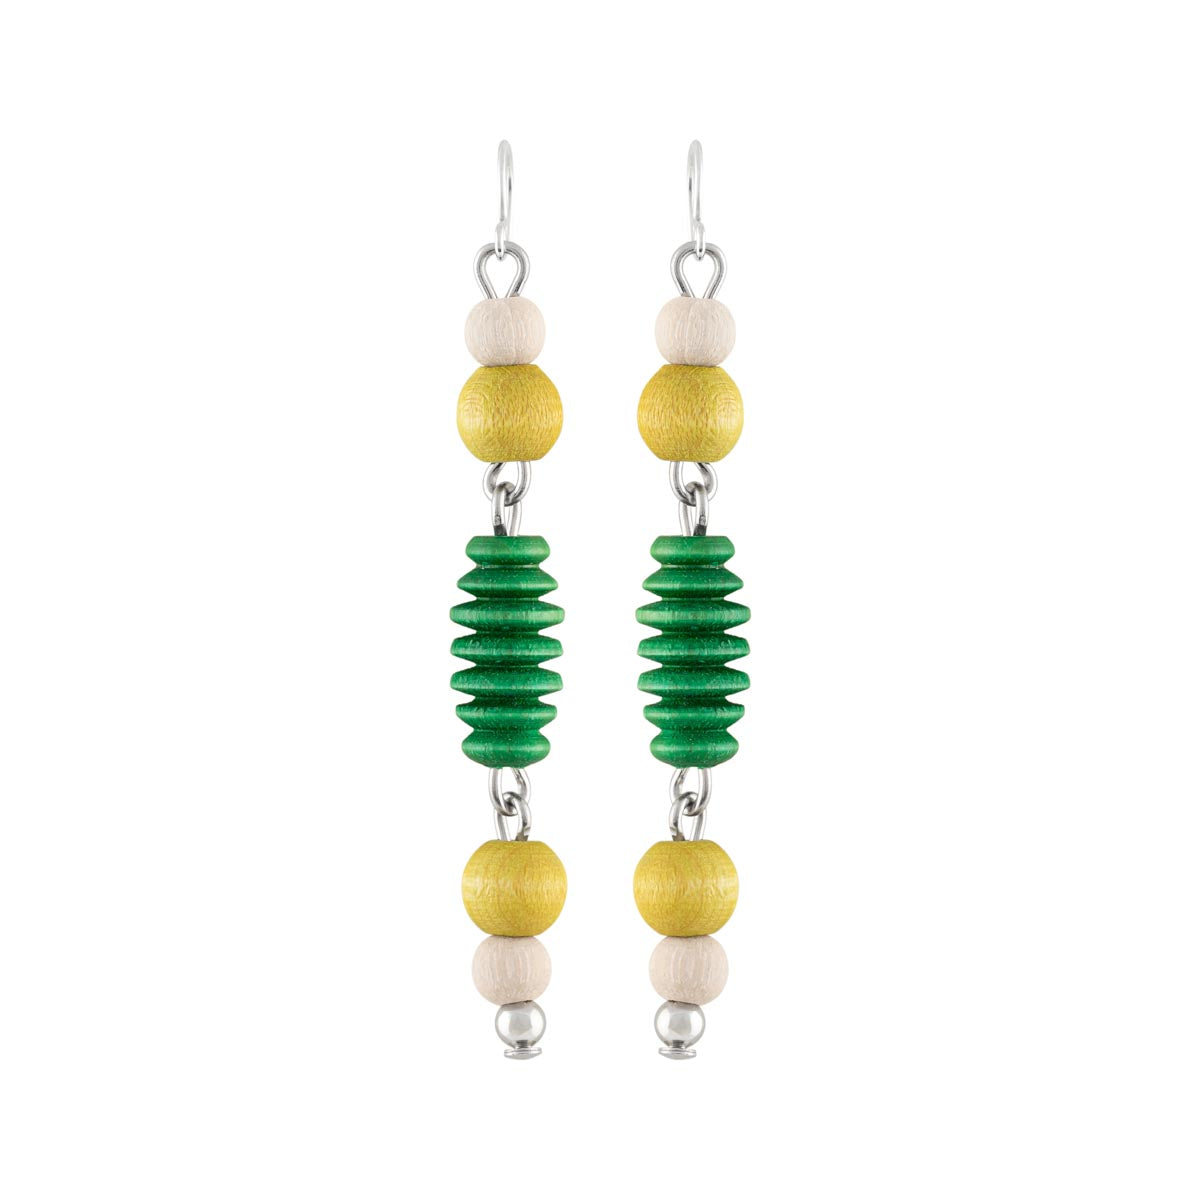 Tuire earrings, green and yellow